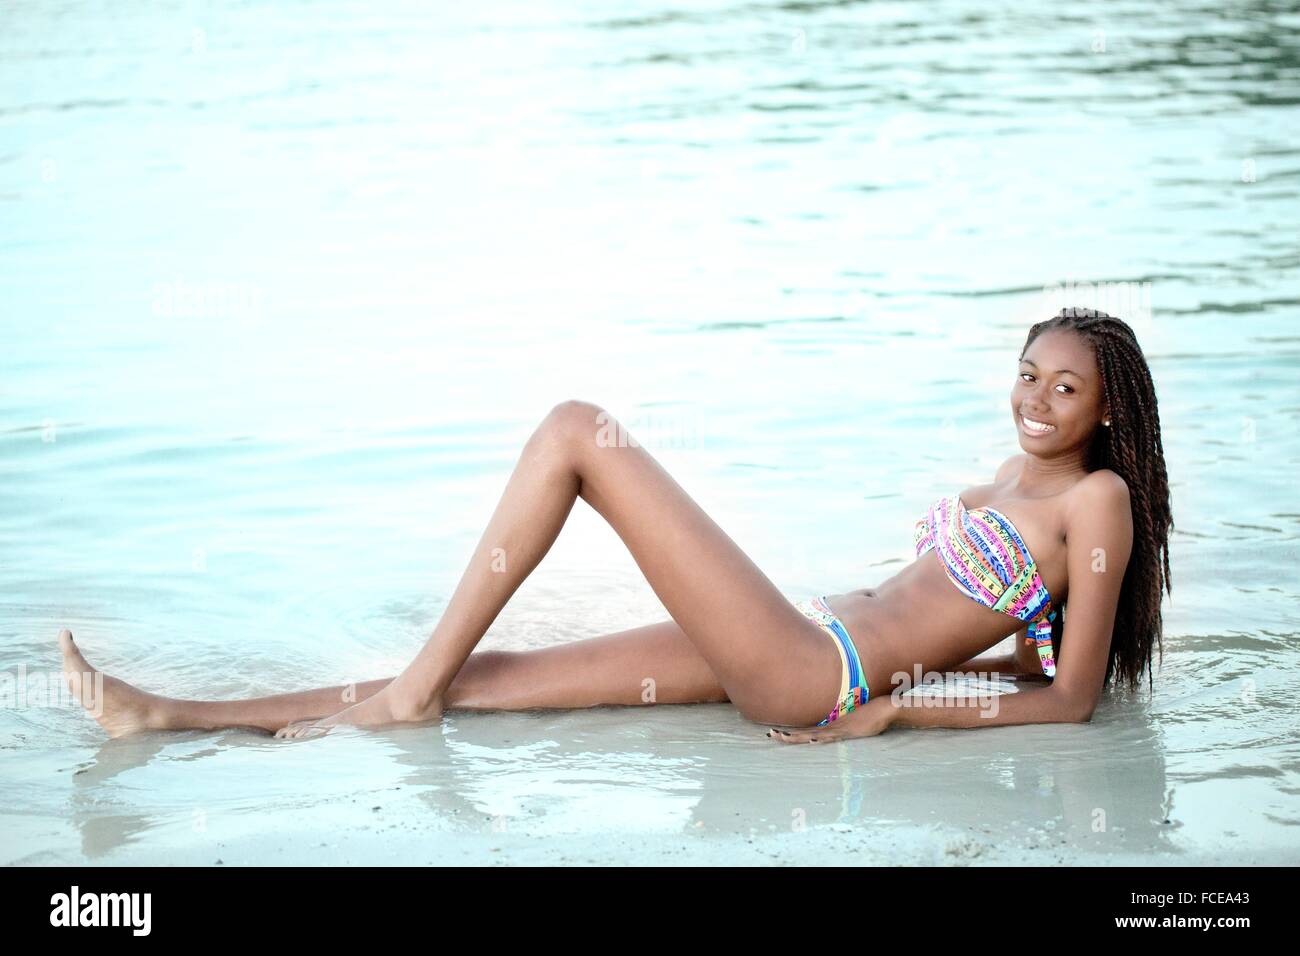 West indian smiling young girl in swimsuit Stock Photo - Alamy